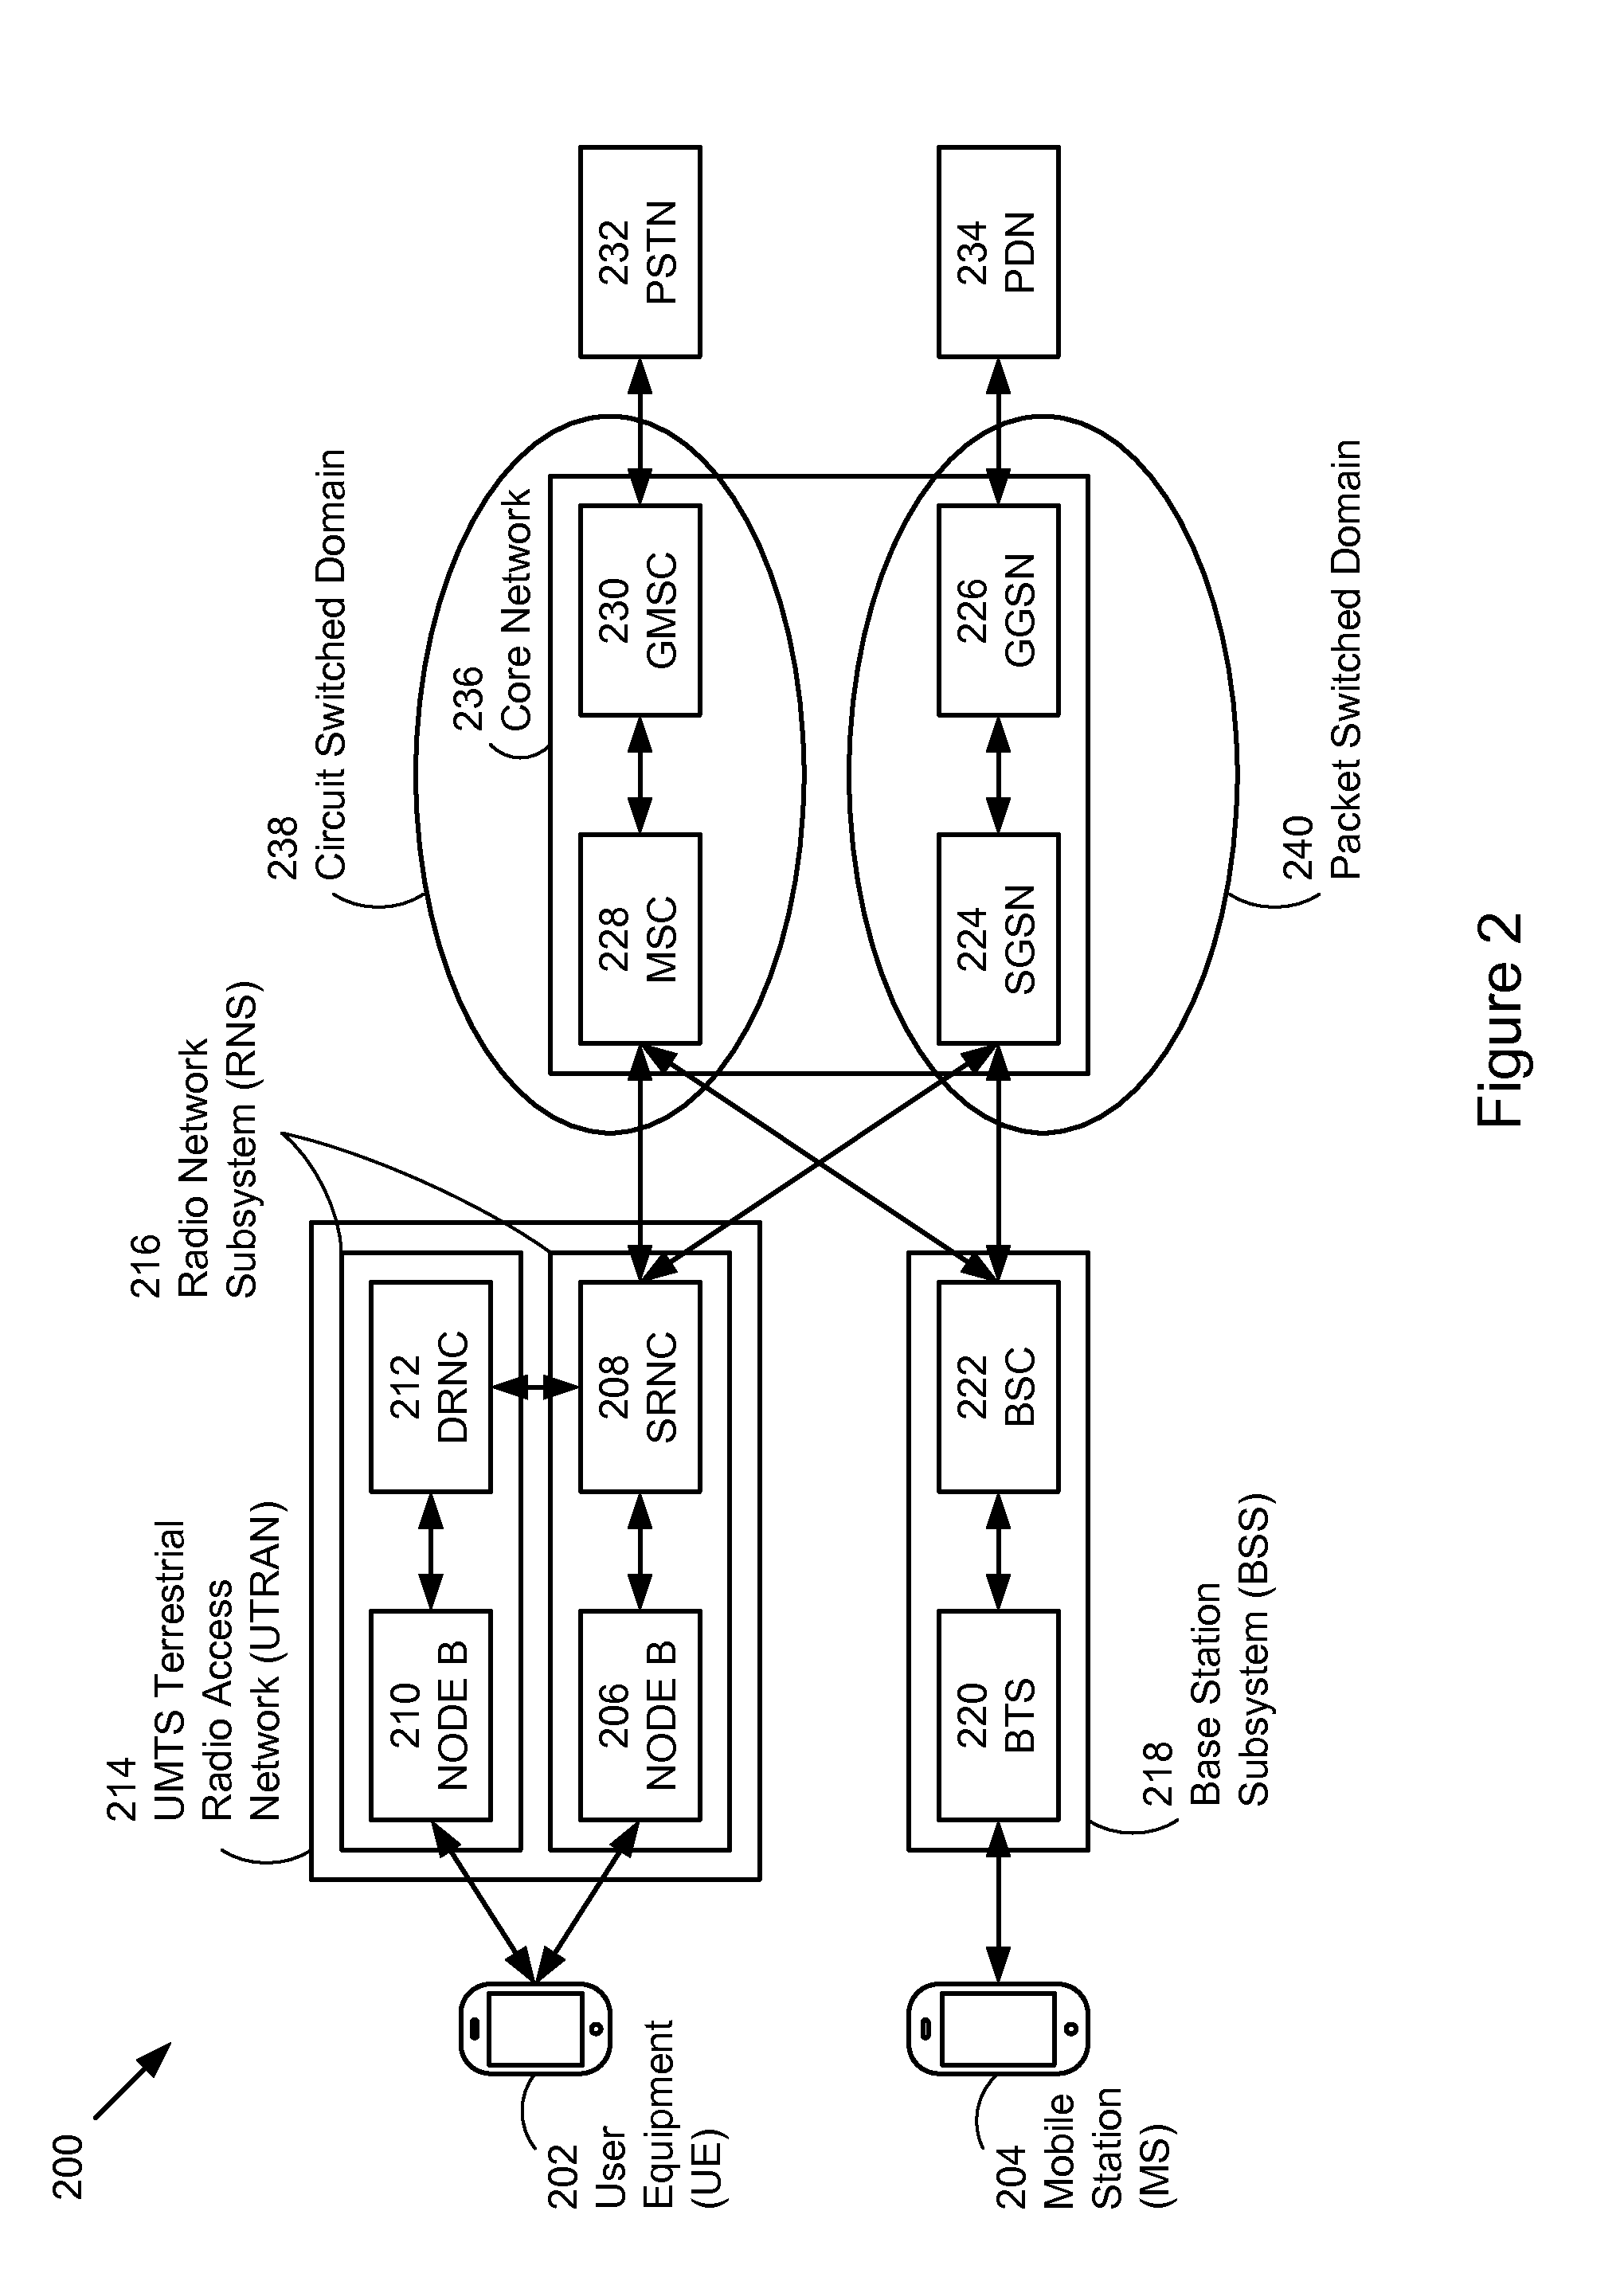 Method and apparatus for radio link control during network congestion in a mobile wireless device